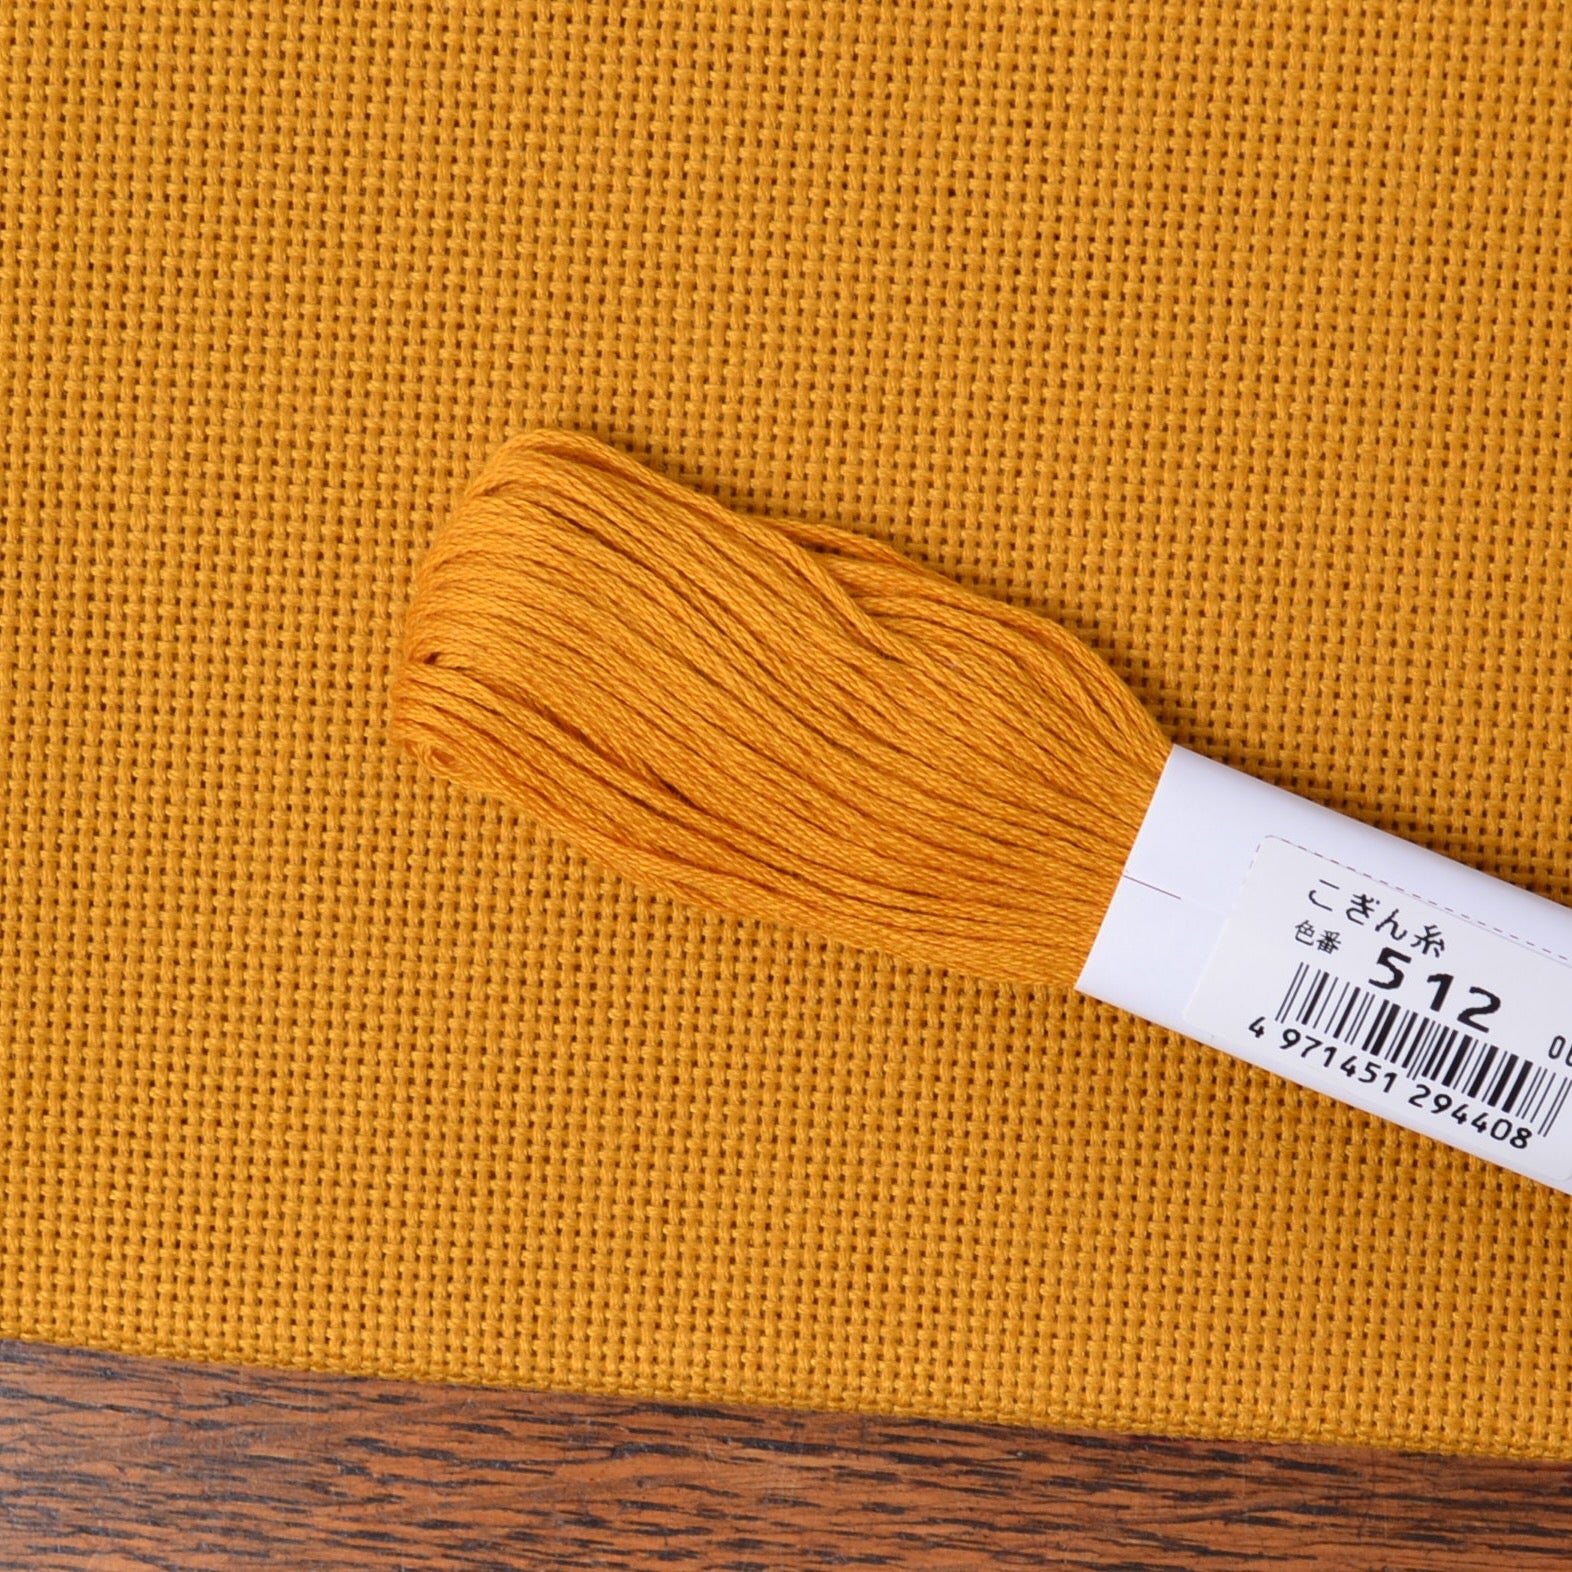 Kogin Stitching, 18 Count Gold Cloth shown with gold kogin thread